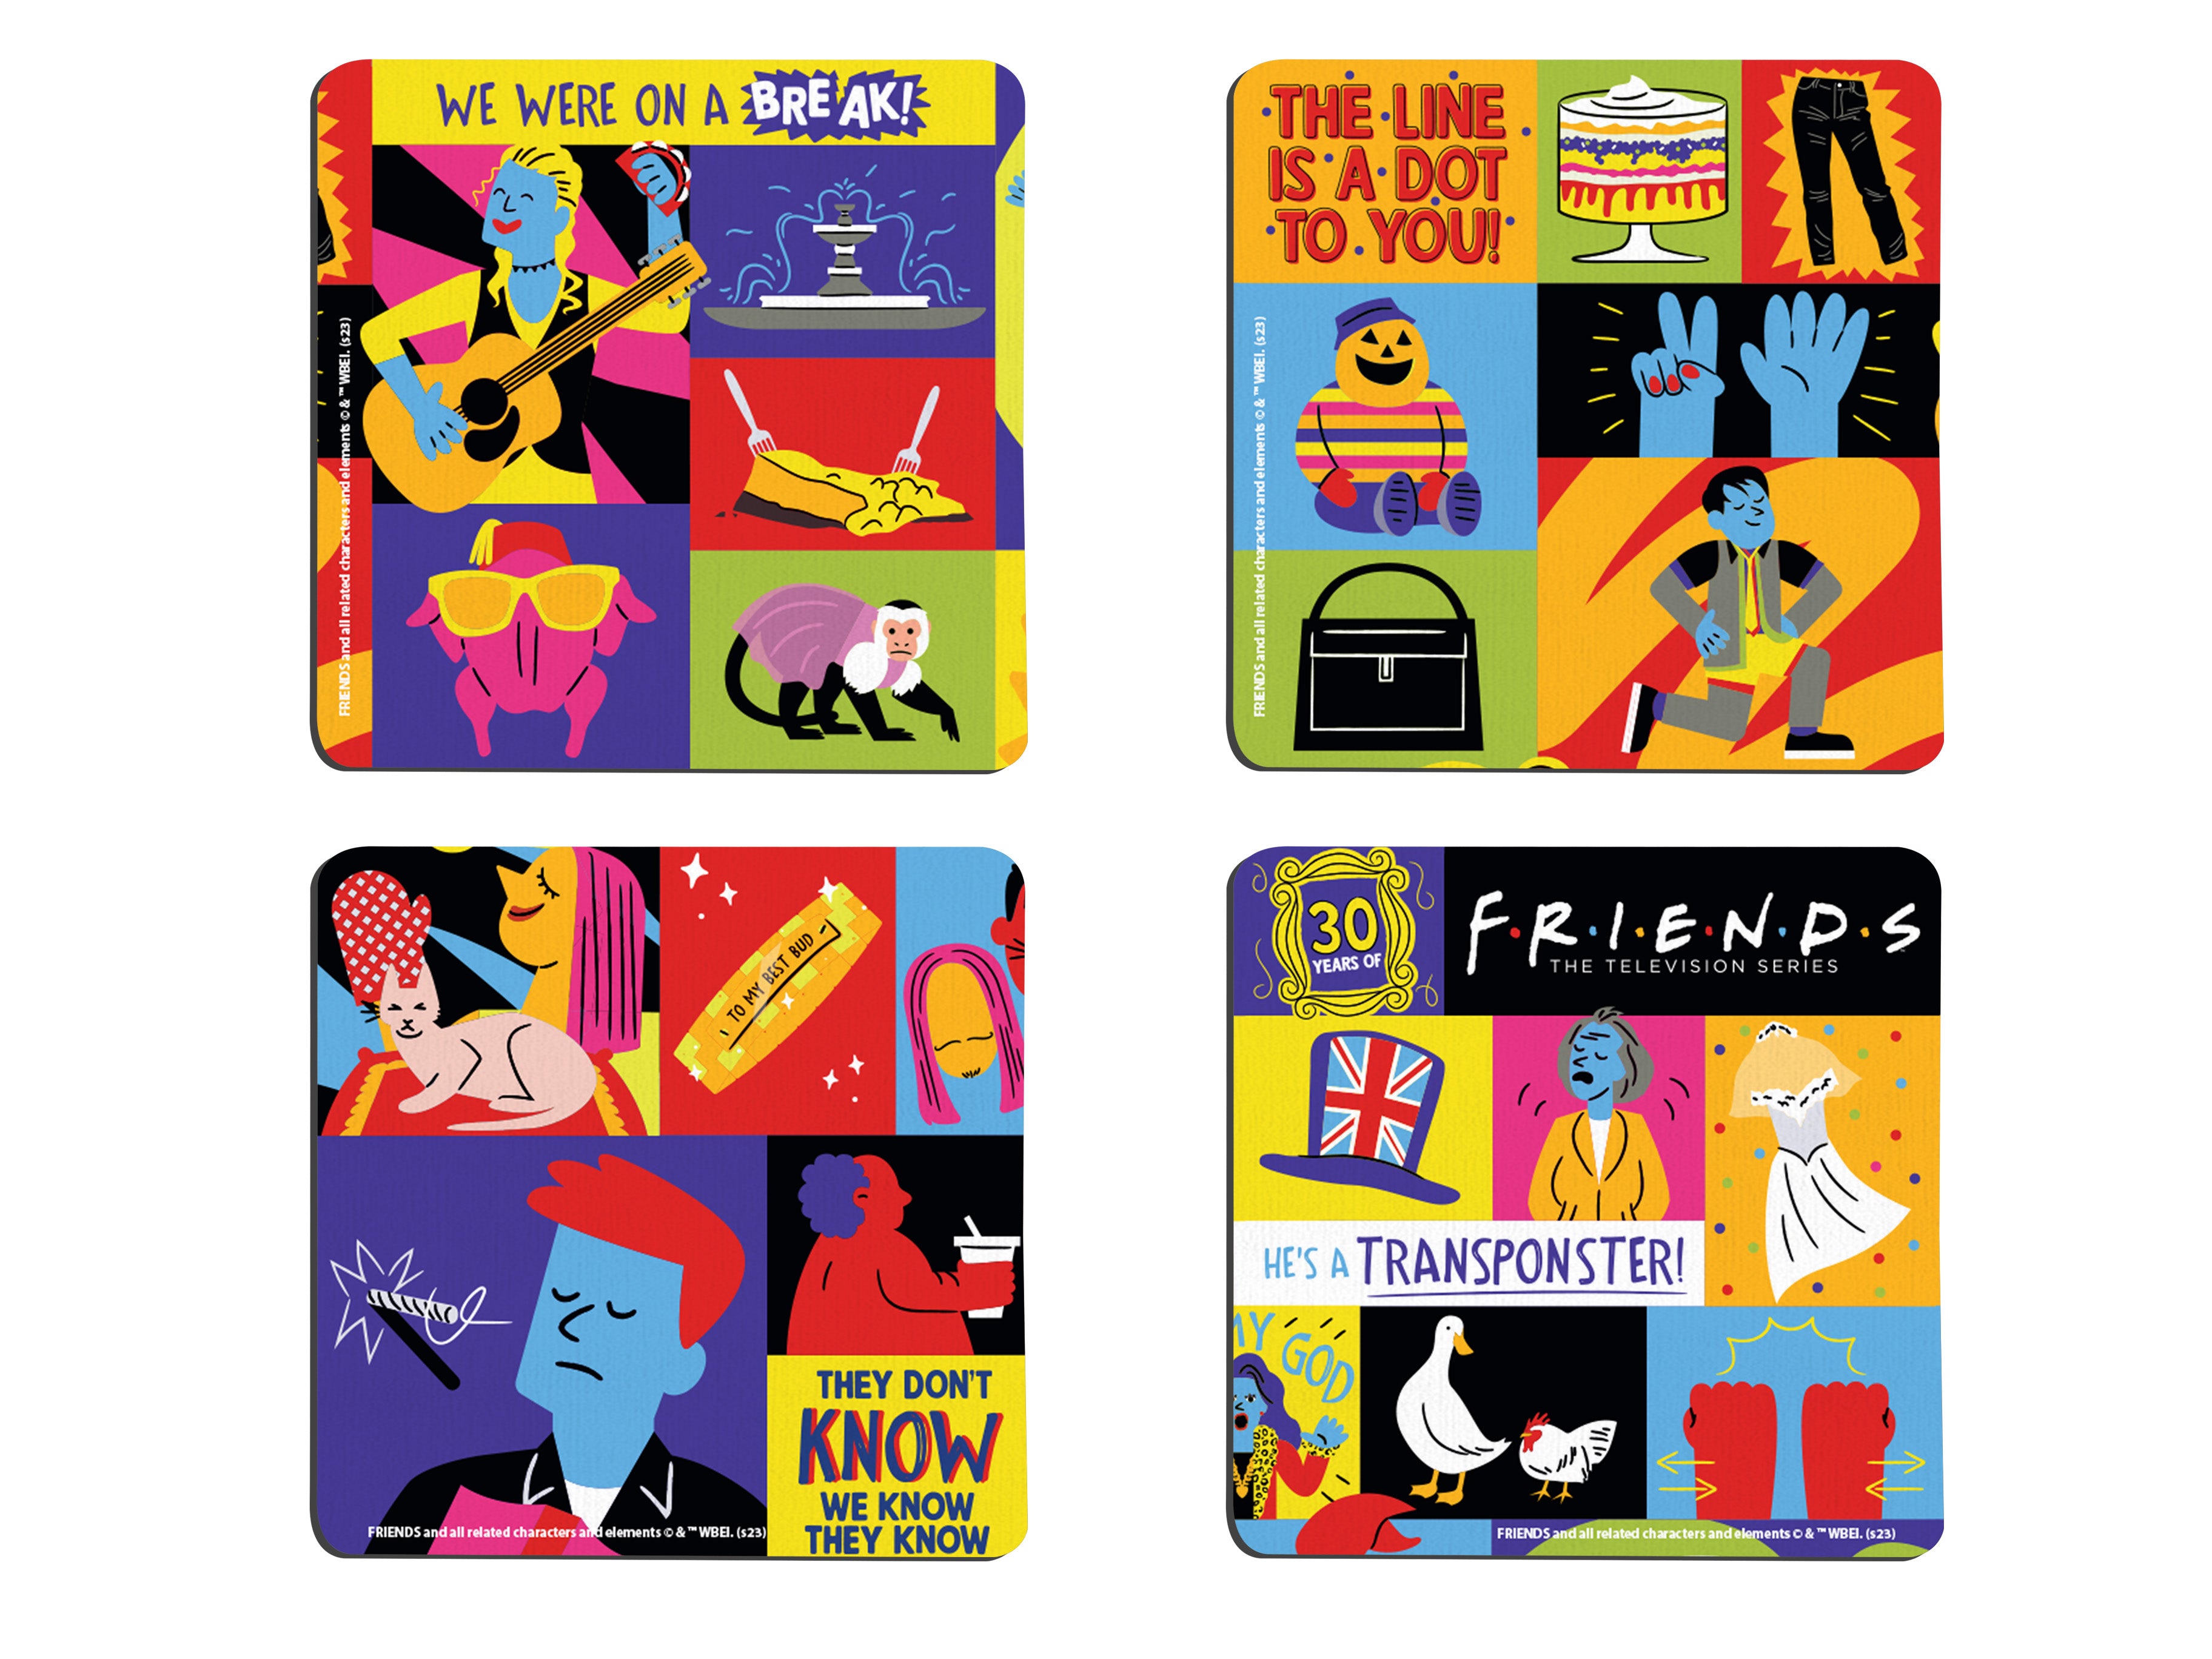 Friends: The Television Show 30th Anniversary (30 Years of Friends) Hardboard Coaster Set of Four CSTRHRD065